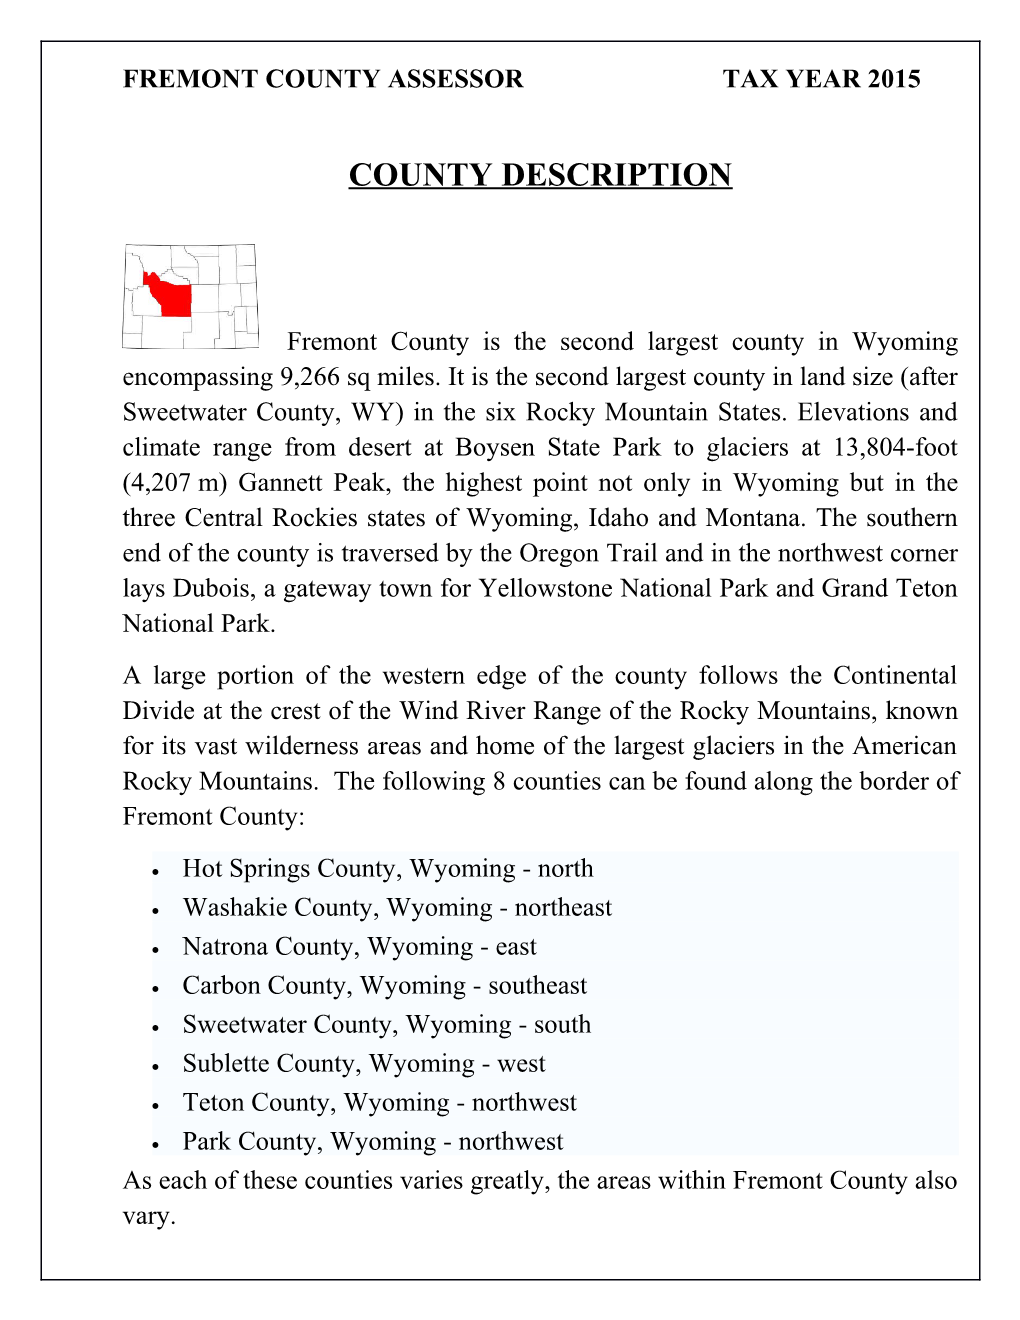 Fremont County Assessor Tax Year 2015